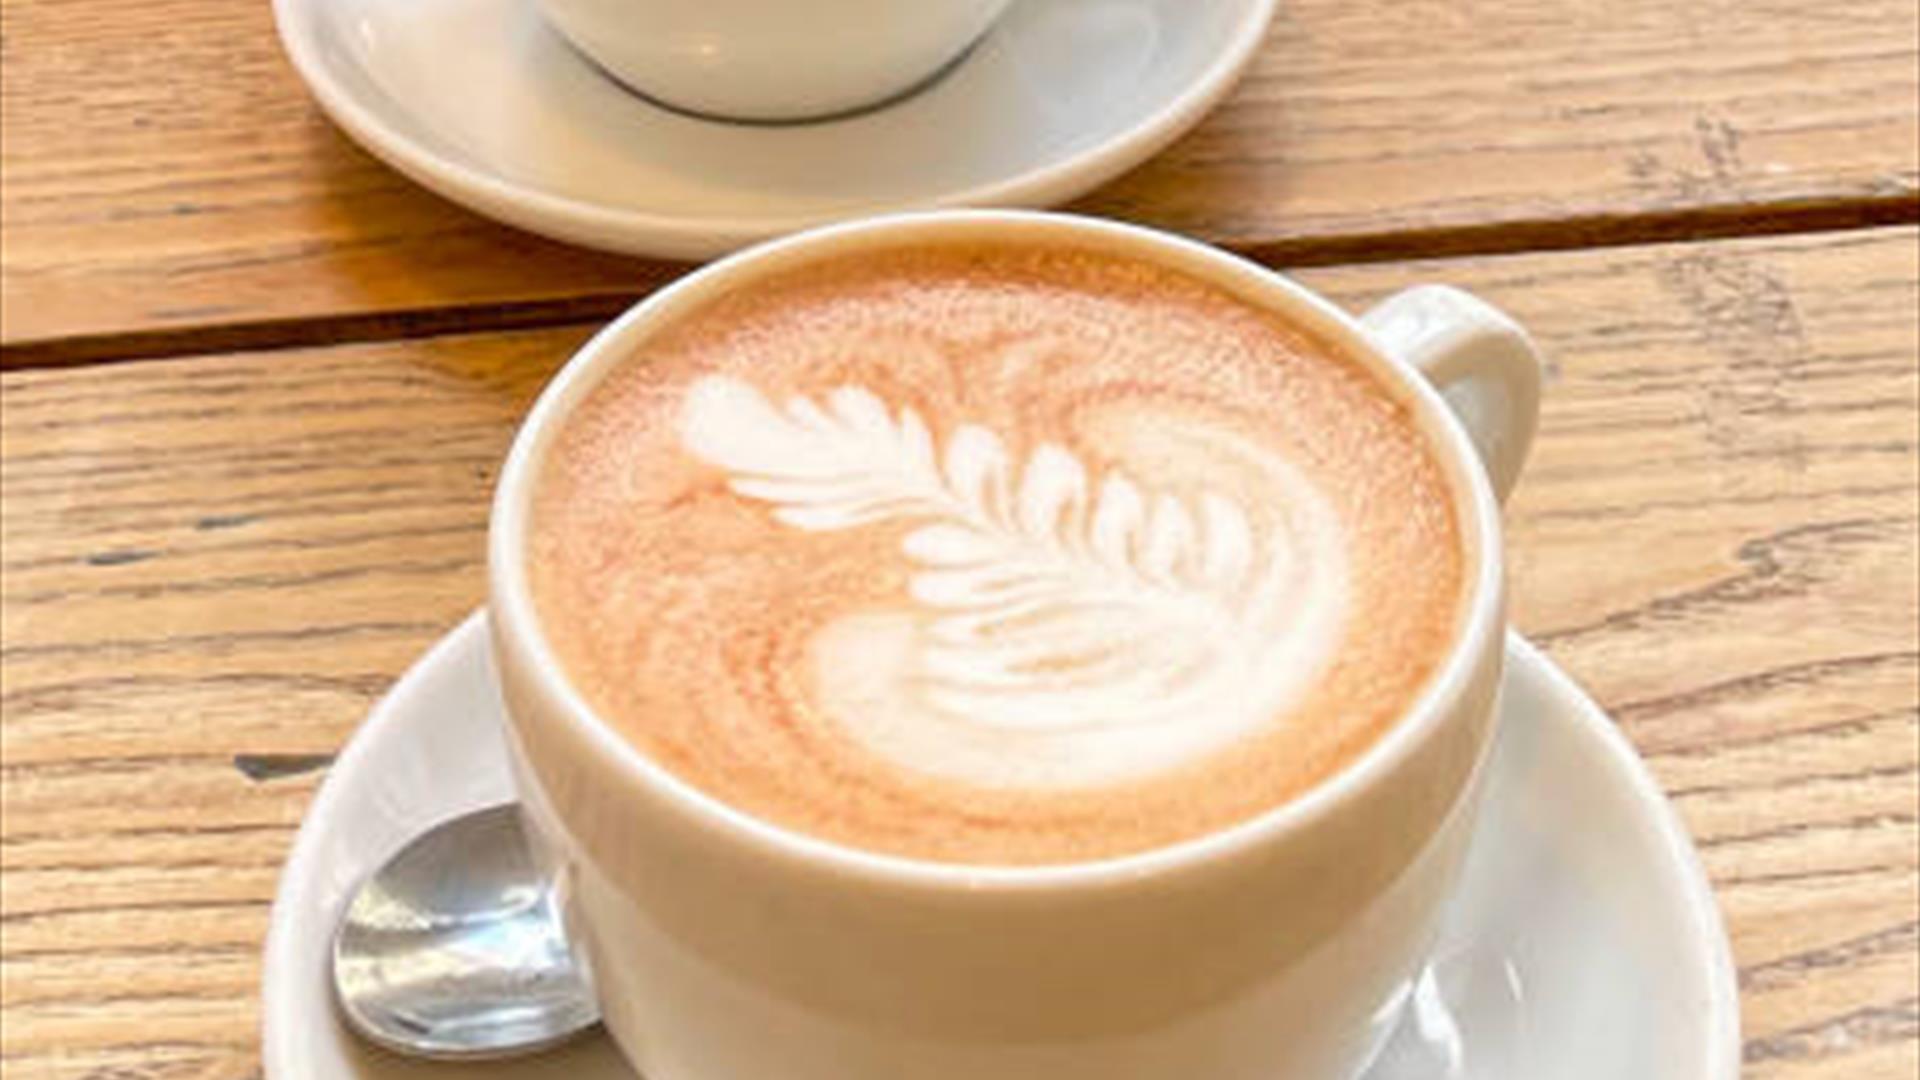 Image shows two white cups with latte coffees